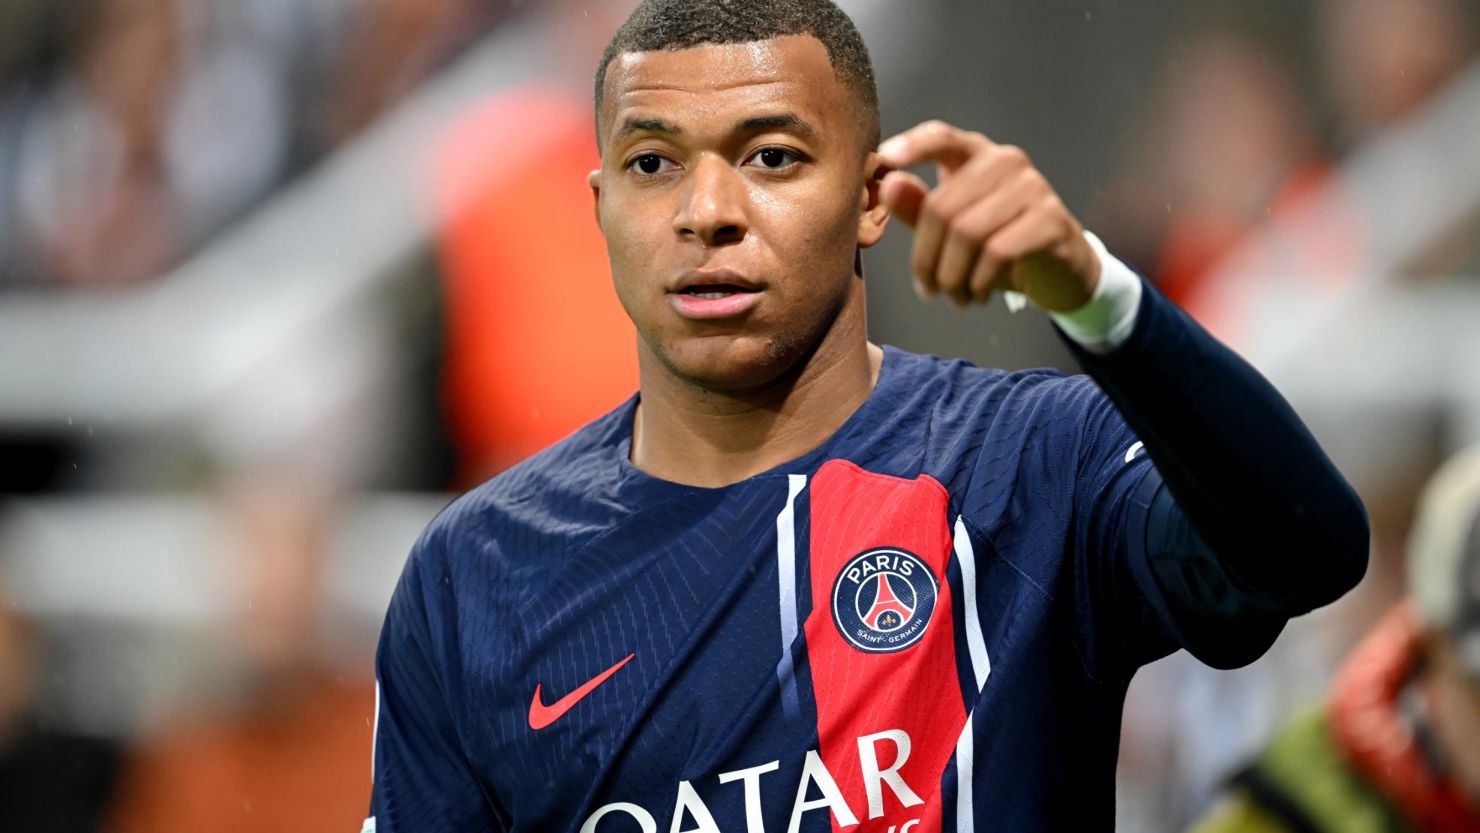 Kylian Mbappé undecided on future as contract winds down